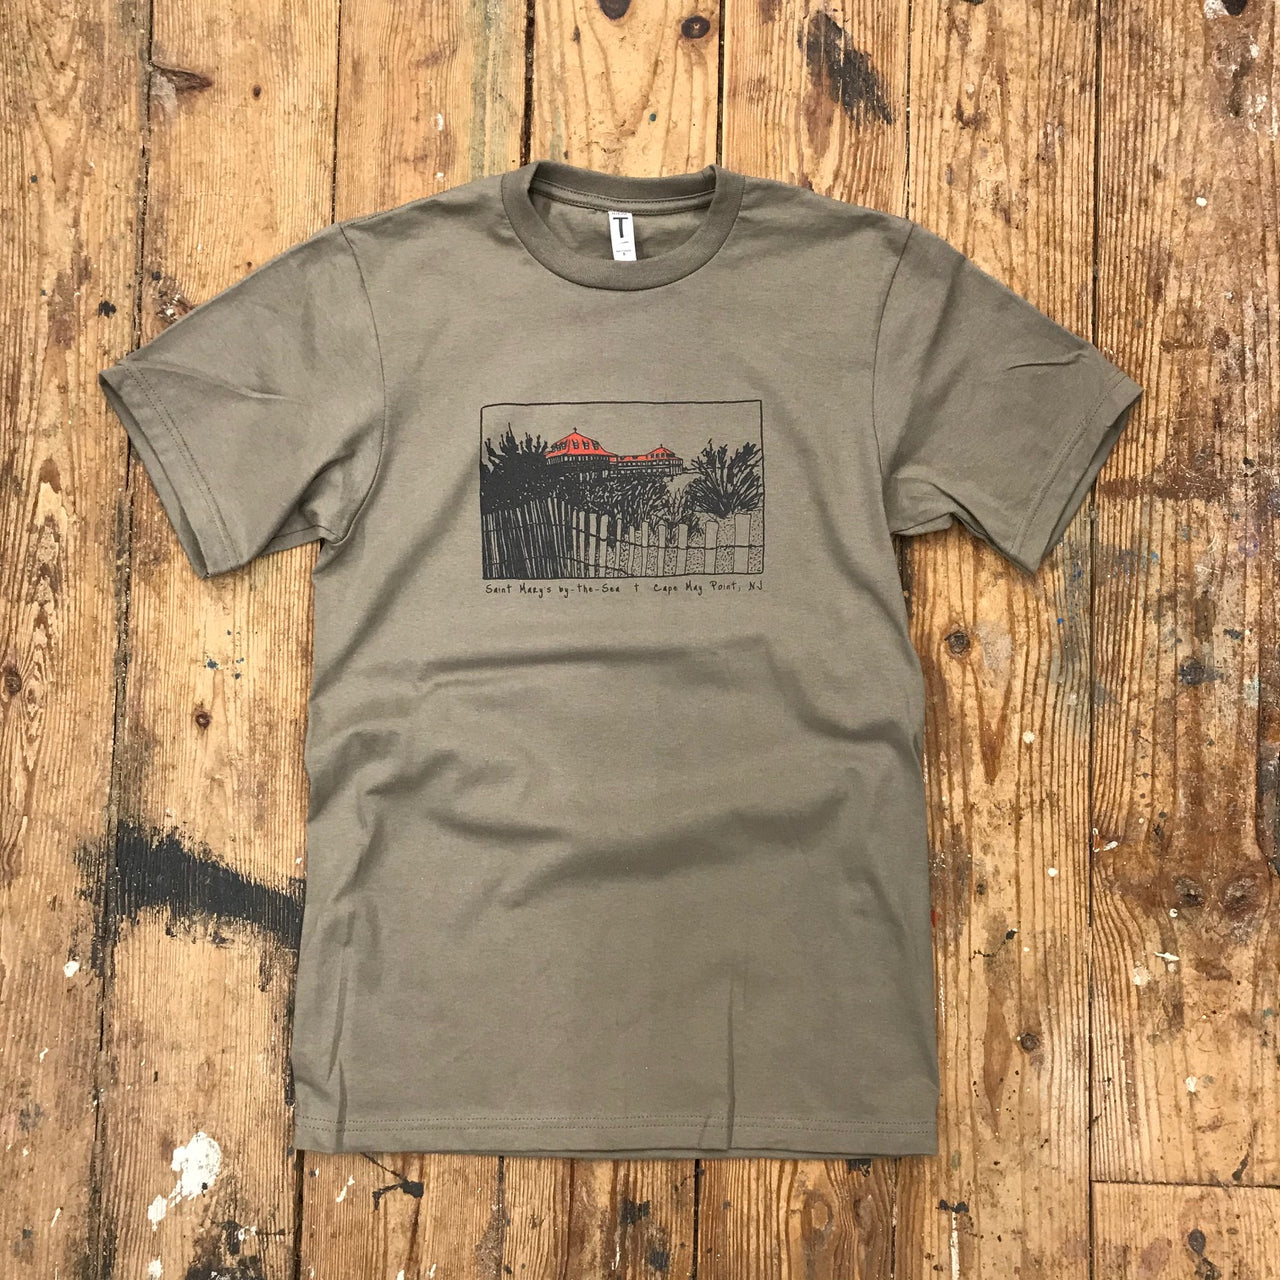 A warm grey t-shirt featuring the 'Saint Mary's by The Sea' design on the front in red and black ink.